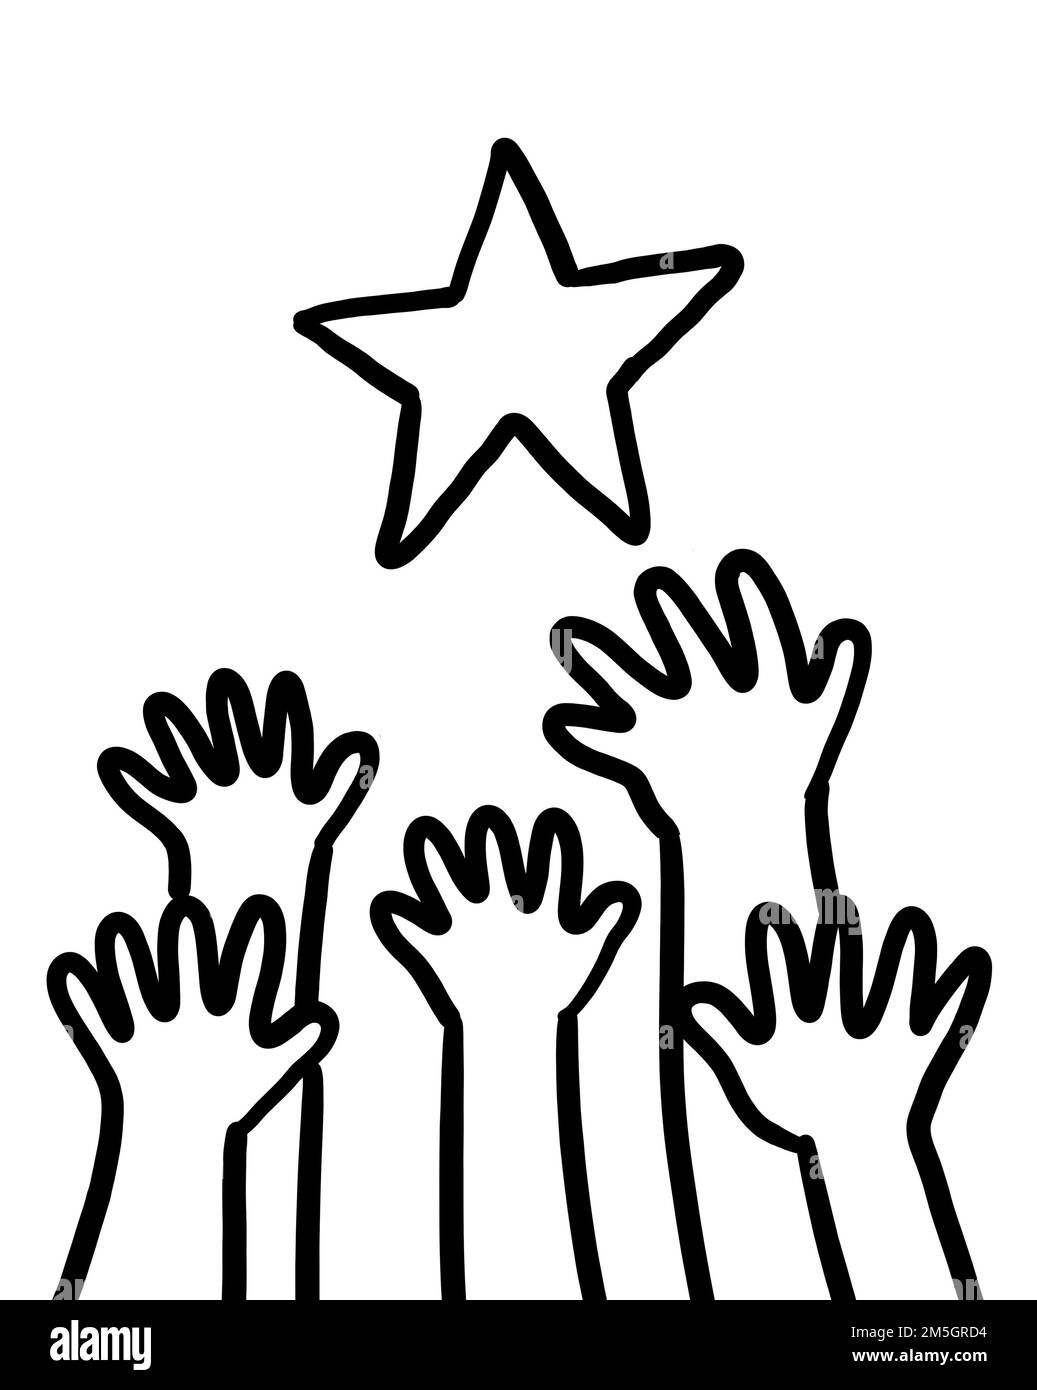 A group of hand reaching up the star. Success motivation achievement concept. Illustration black outline drawing, isolated on white background. Stock Photo